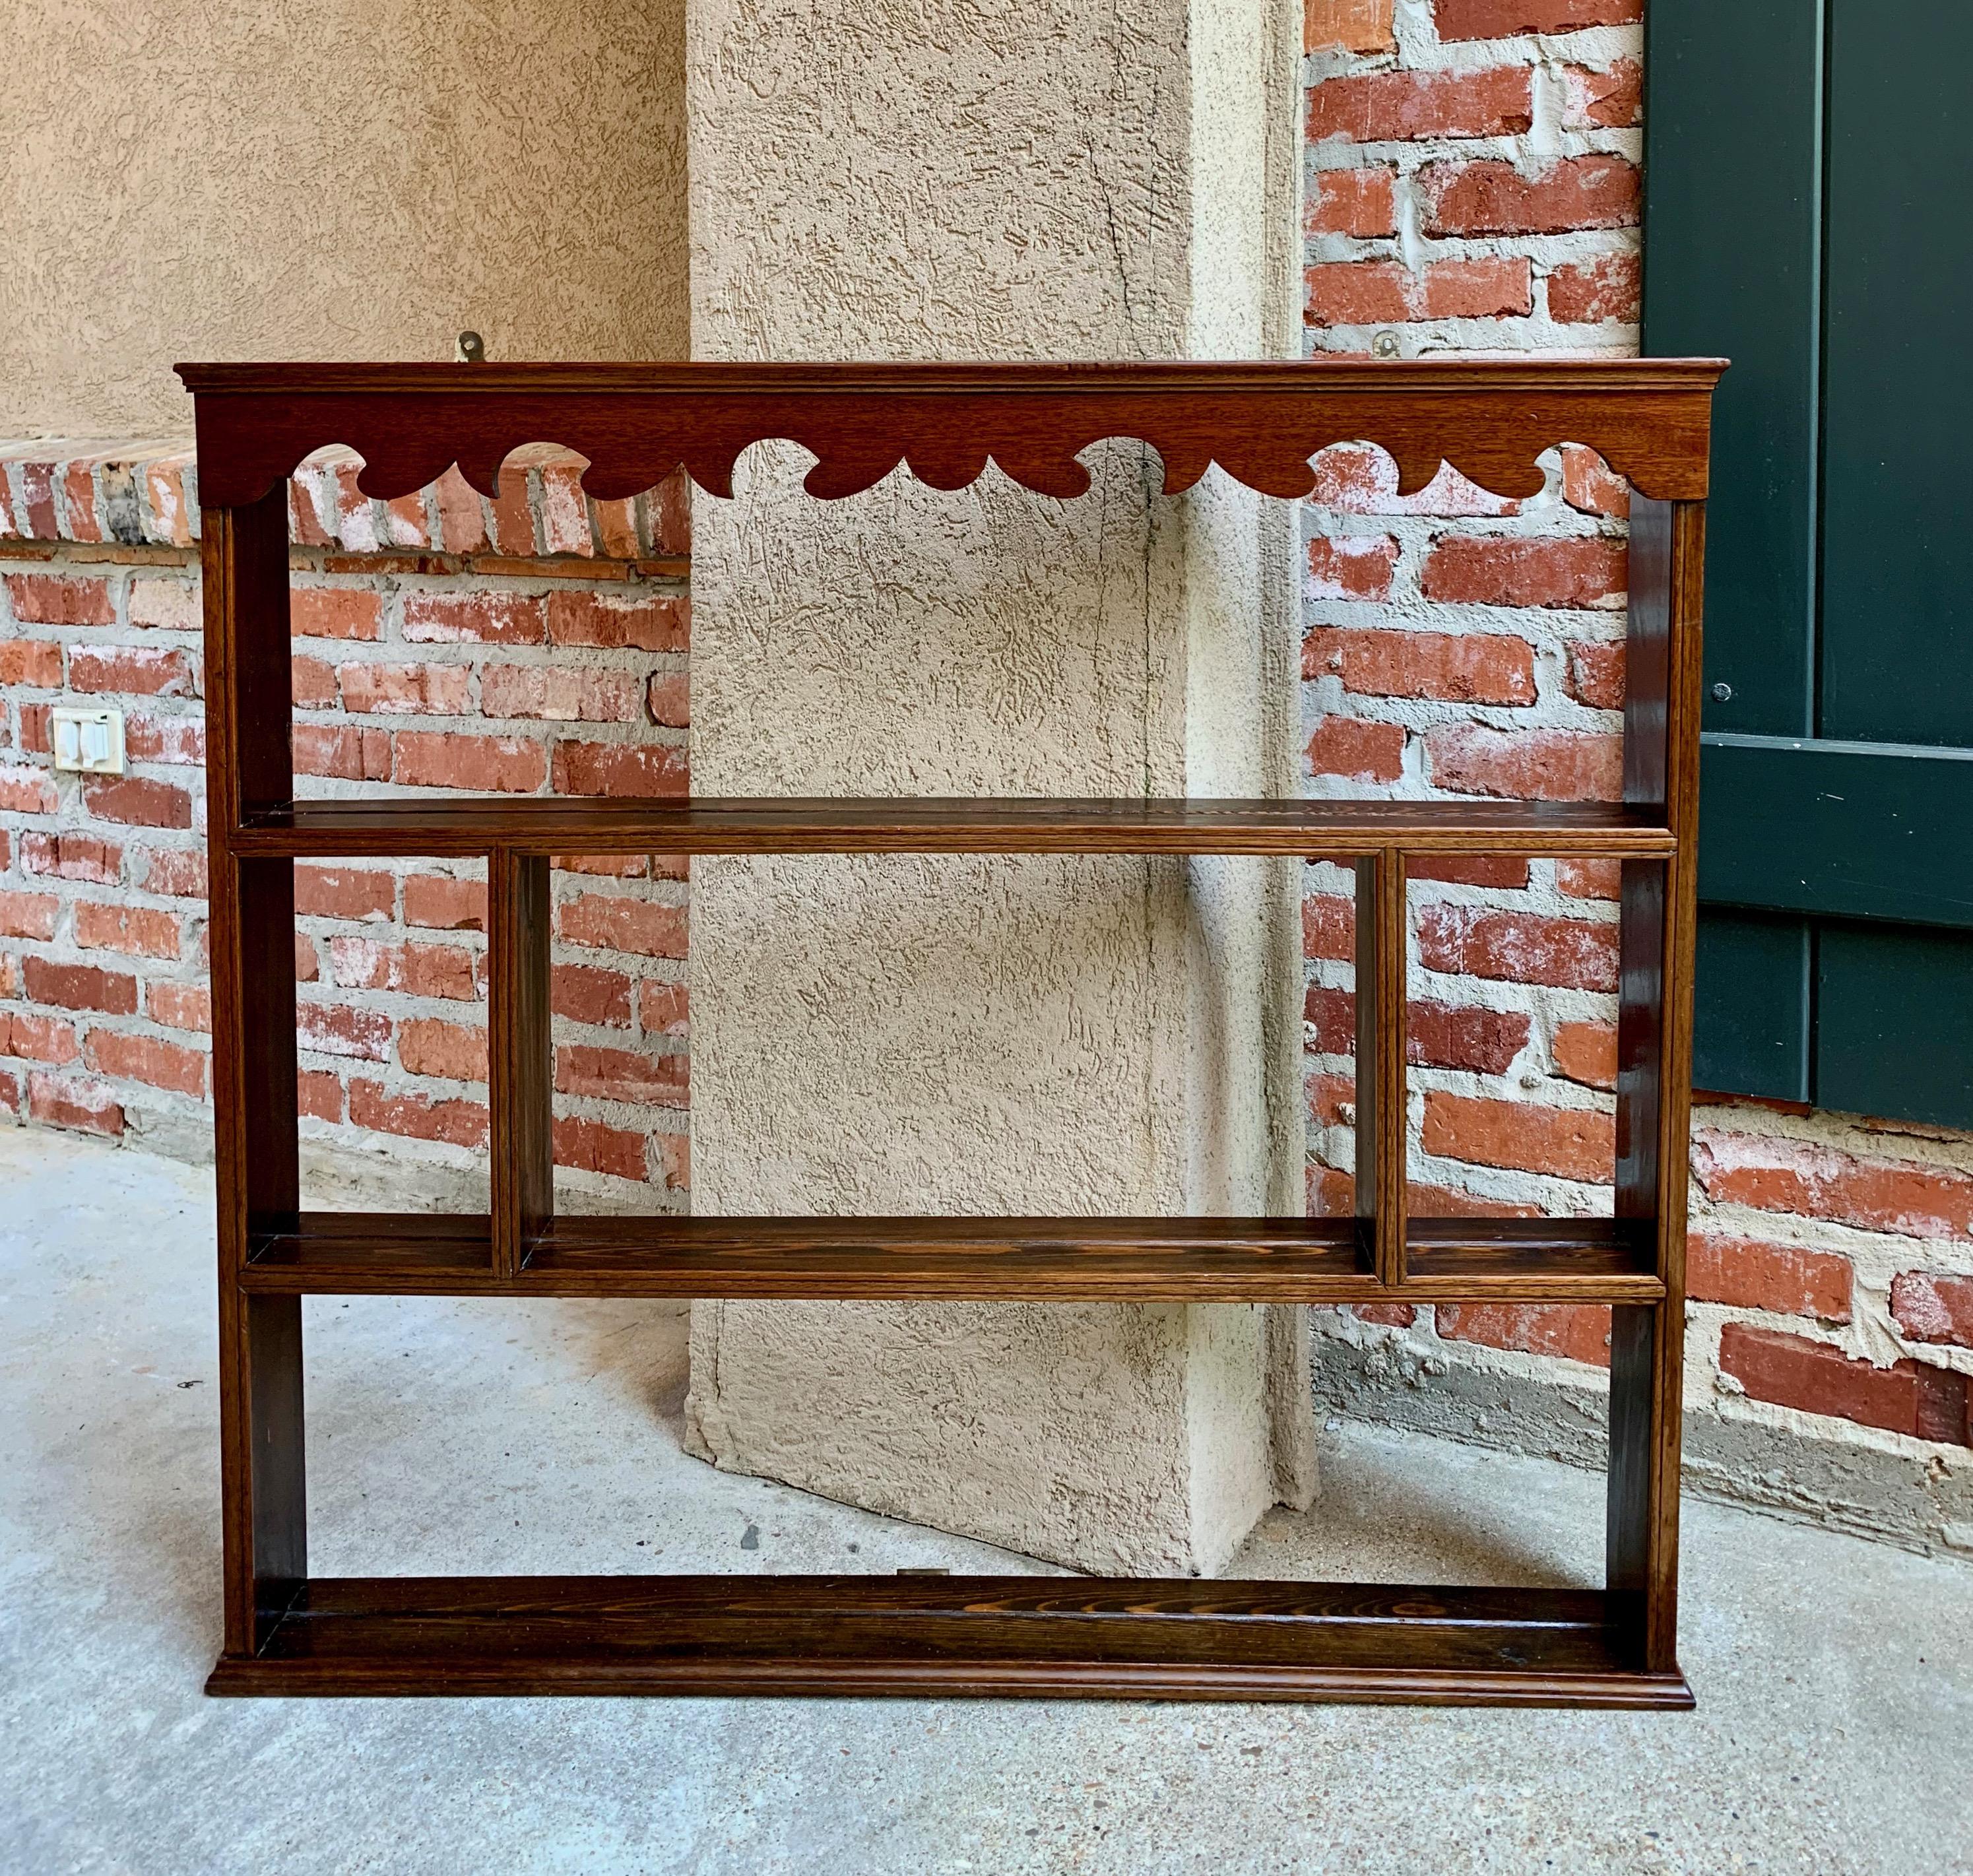 Direct from England, a true antique English plate rack in a versatile size, with plenty of different size display shelves!~
~Large scalloped upper crown (looks like mahogany) sets the Classic look~
~Fronts of all shelves are finished with dual